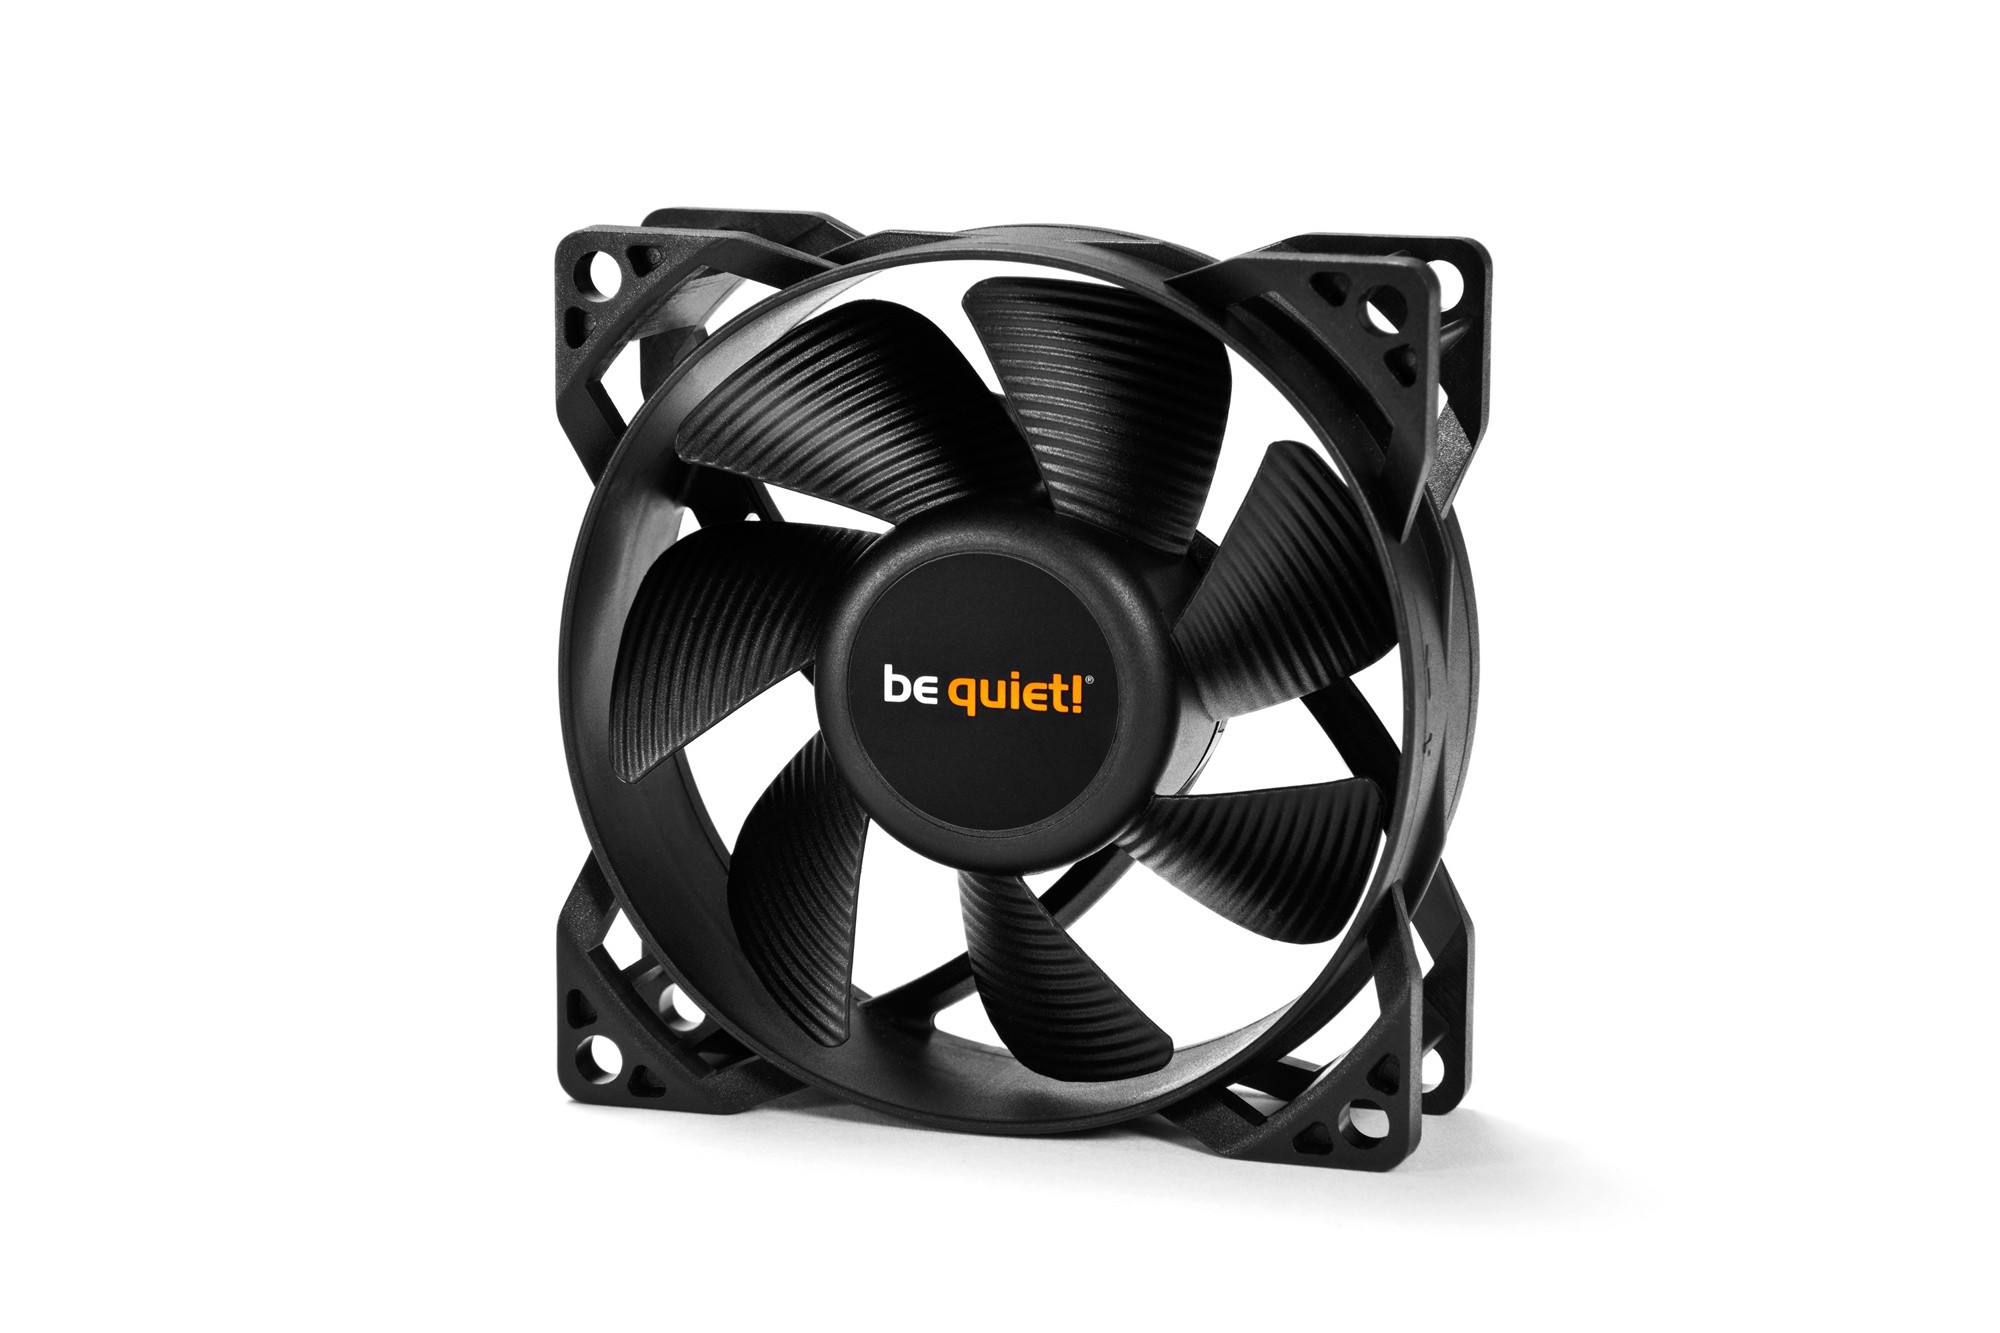  be quiet! Pure Wings 2 80mm PWM (BL037) (80, 1900rpm, 26.3CFM, 19.2dB, 4-pin, Rifle)